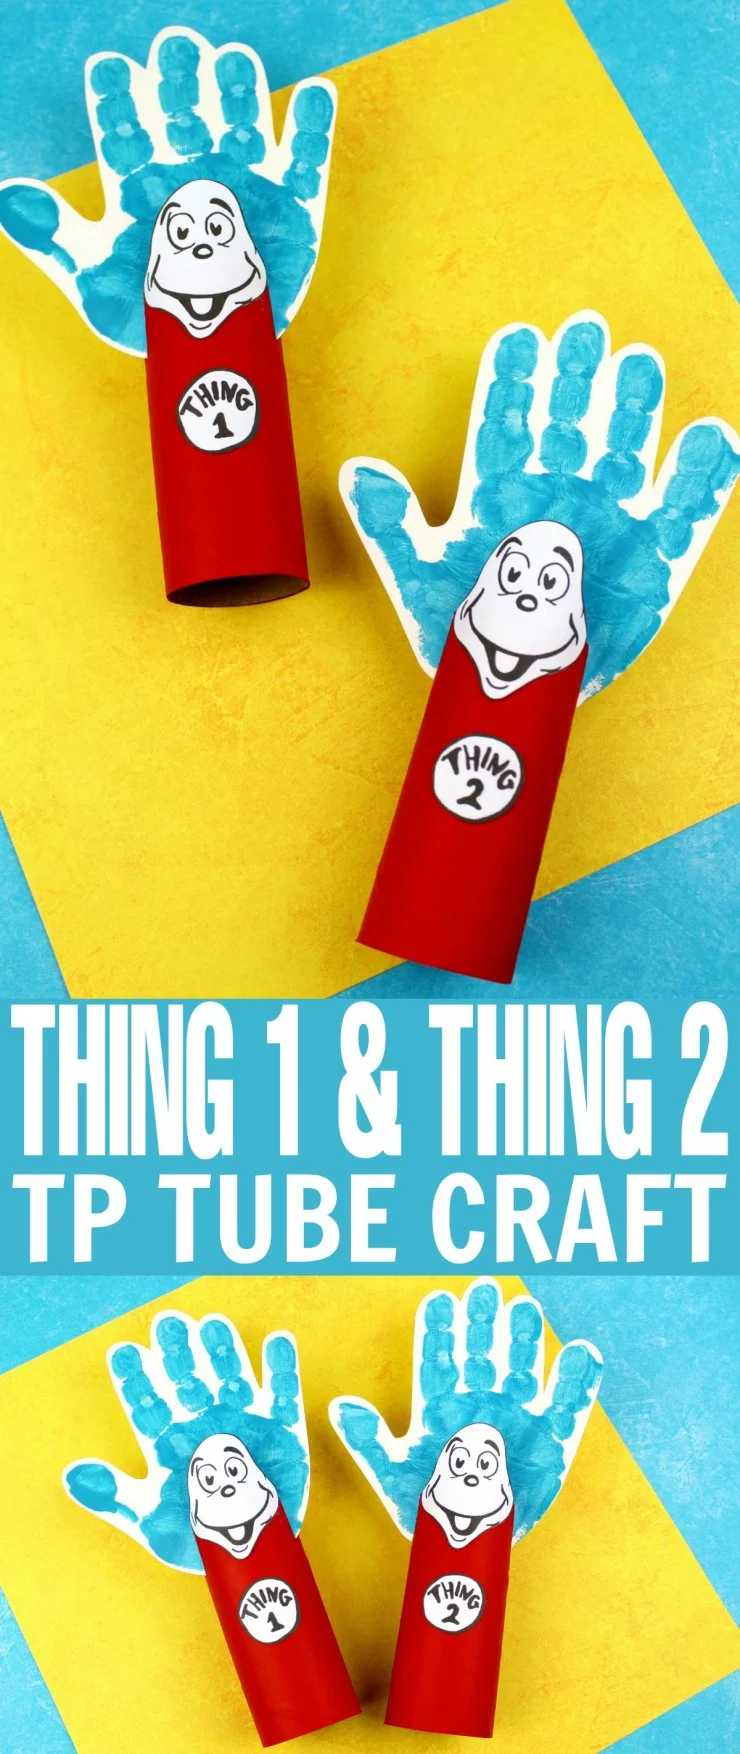 This Thing 1 and Thing 2 Toilet Paper Tube Craft is a fun kids craft that ties in really well with The Cat in the Hat. It's a perfect craft for Dr. Seuss day which is coming up on the March 2nd!